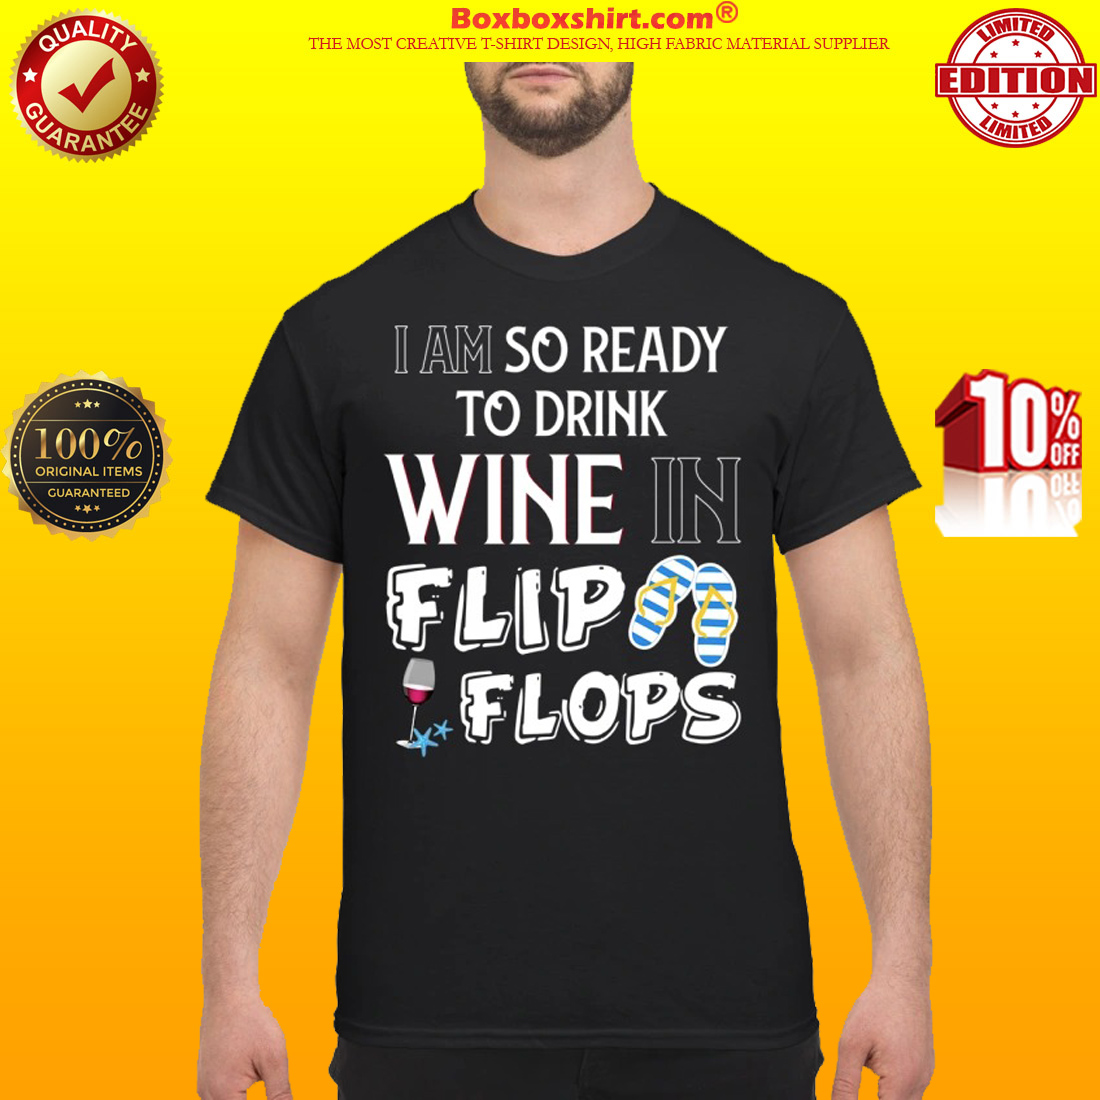 I am so ready to drink wine in flip flops shirt